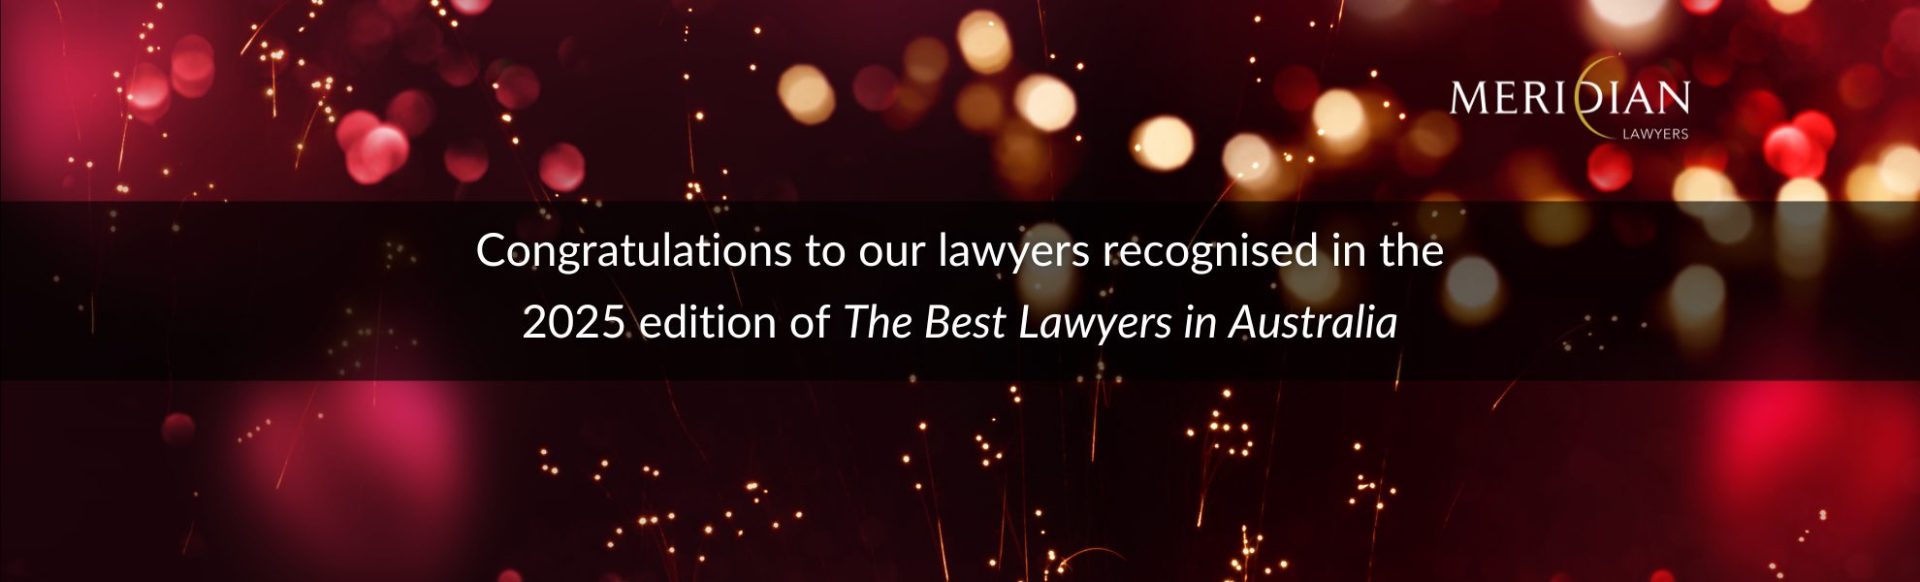 Meridian Lawyers recognised in the Best Lawyers 2025 edition